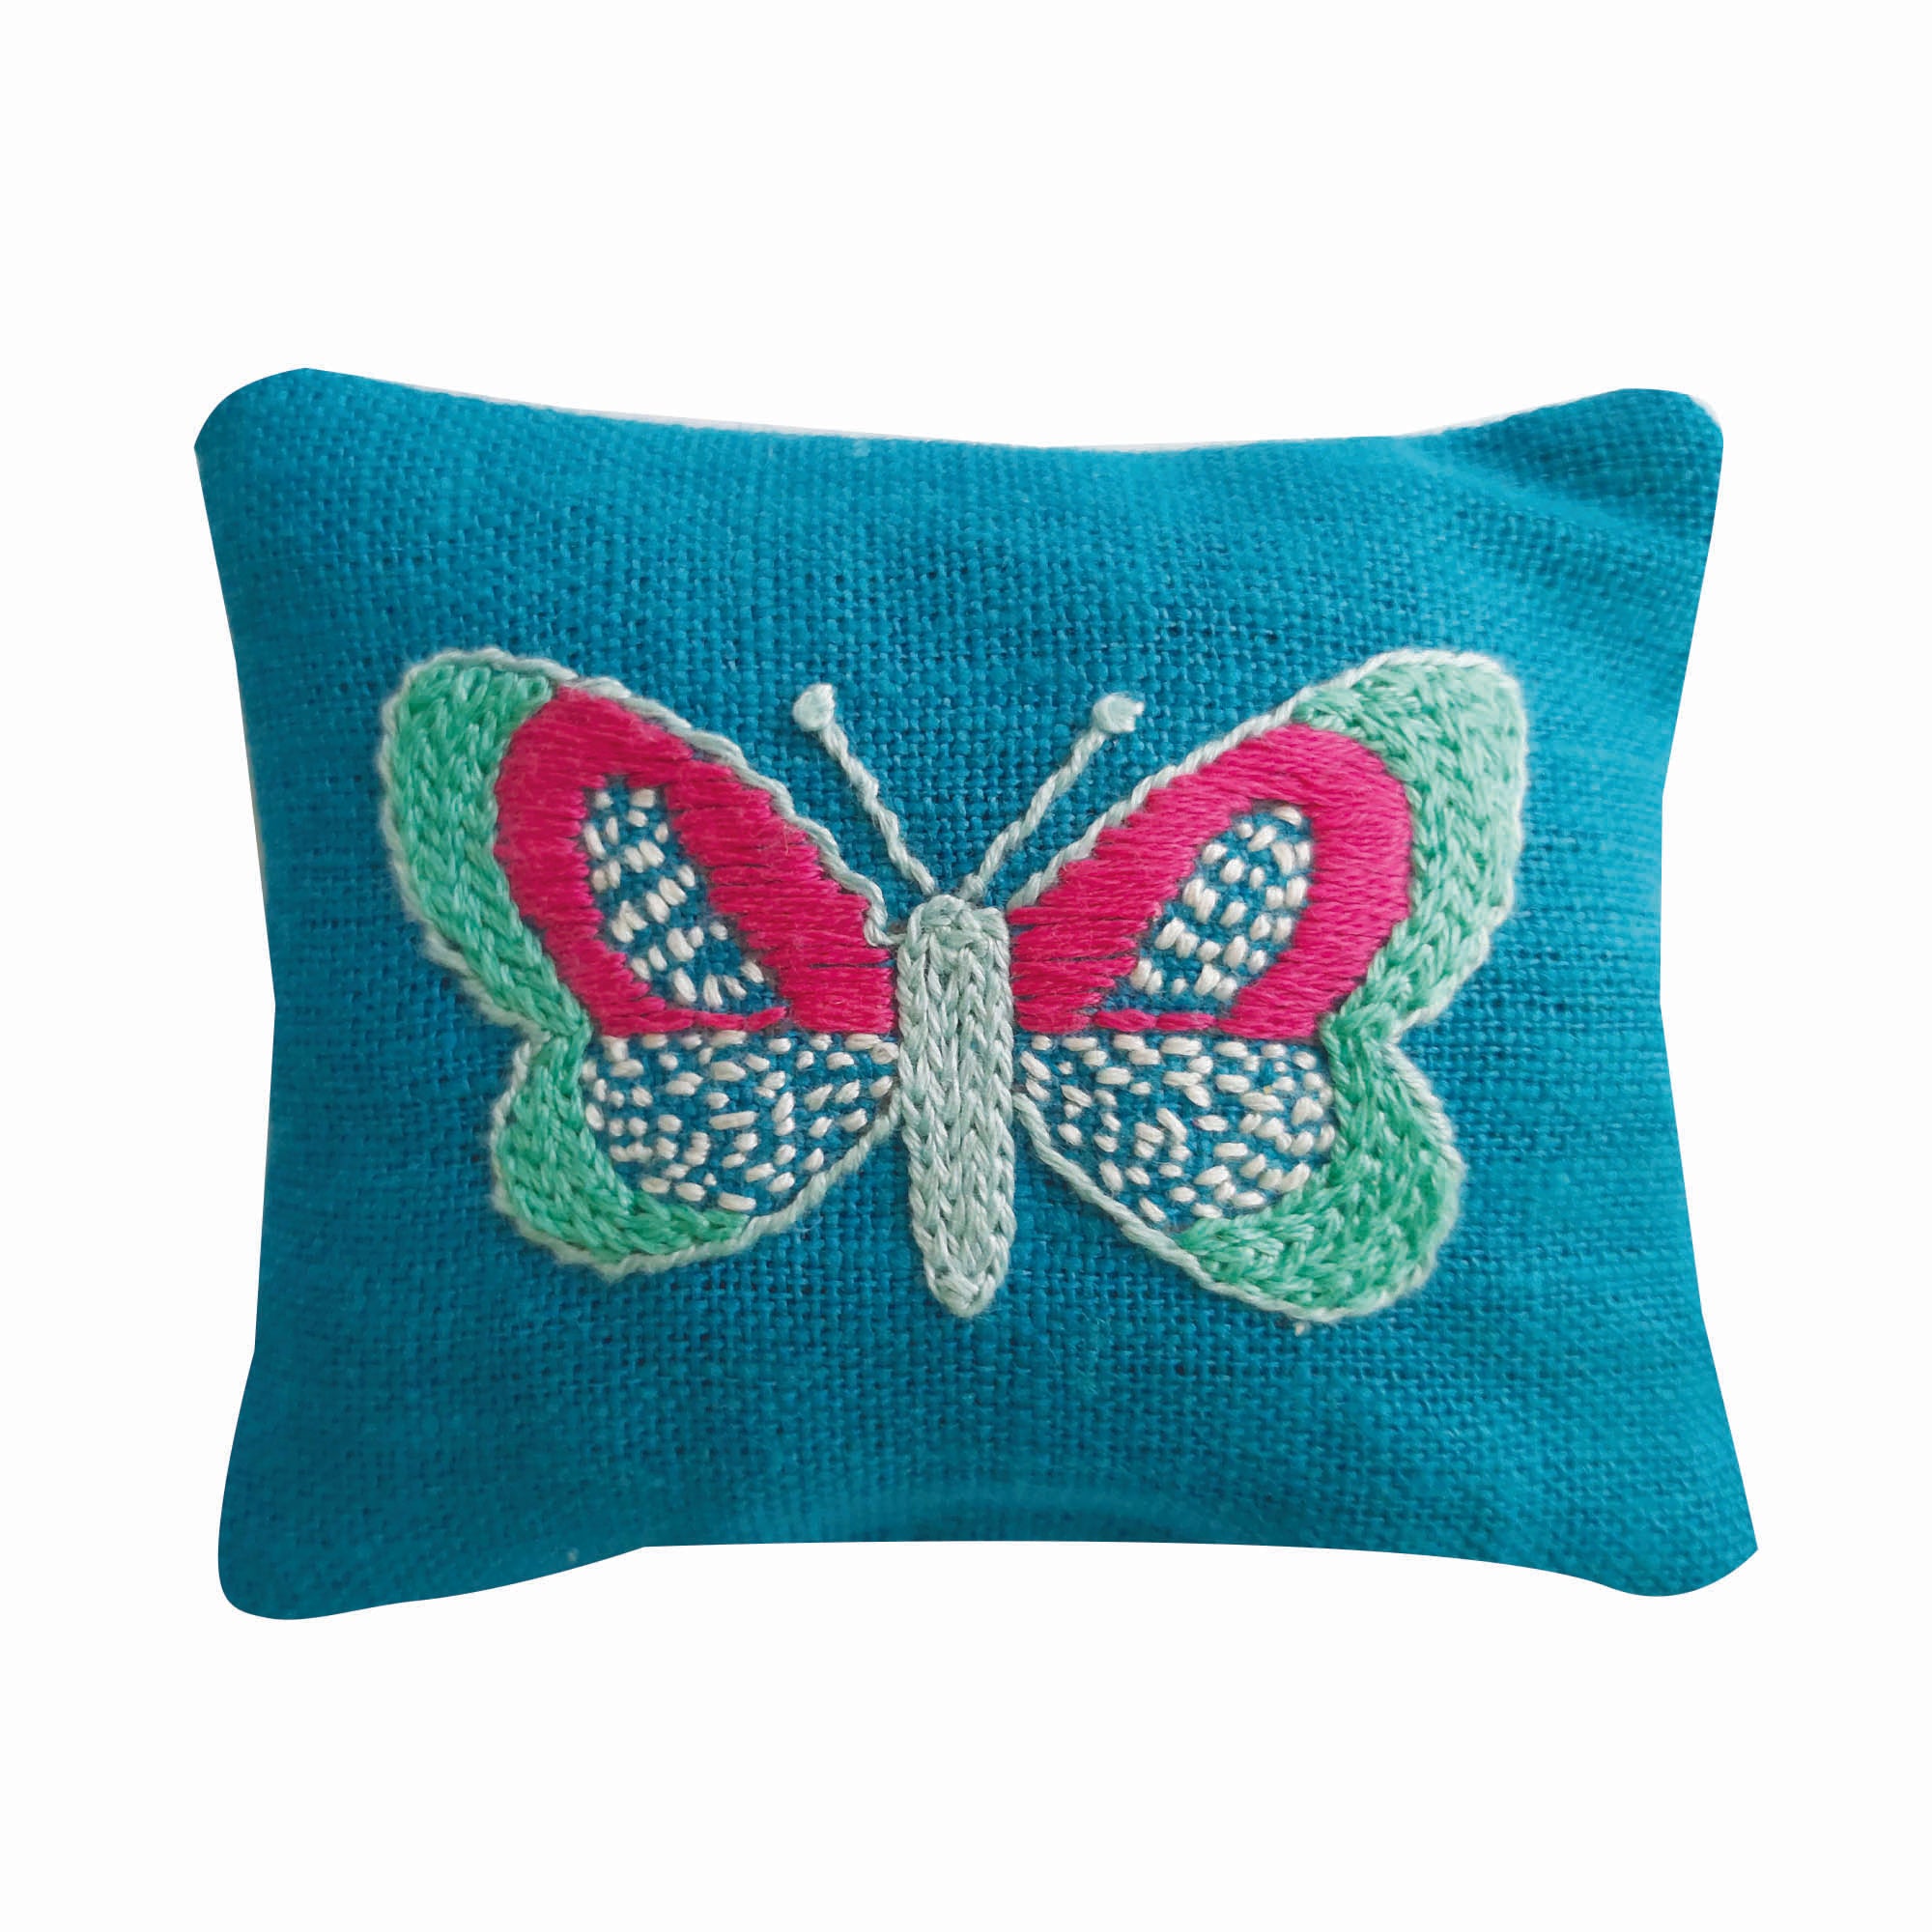 Butterfly Embroidered Lavender Bag Turquoise